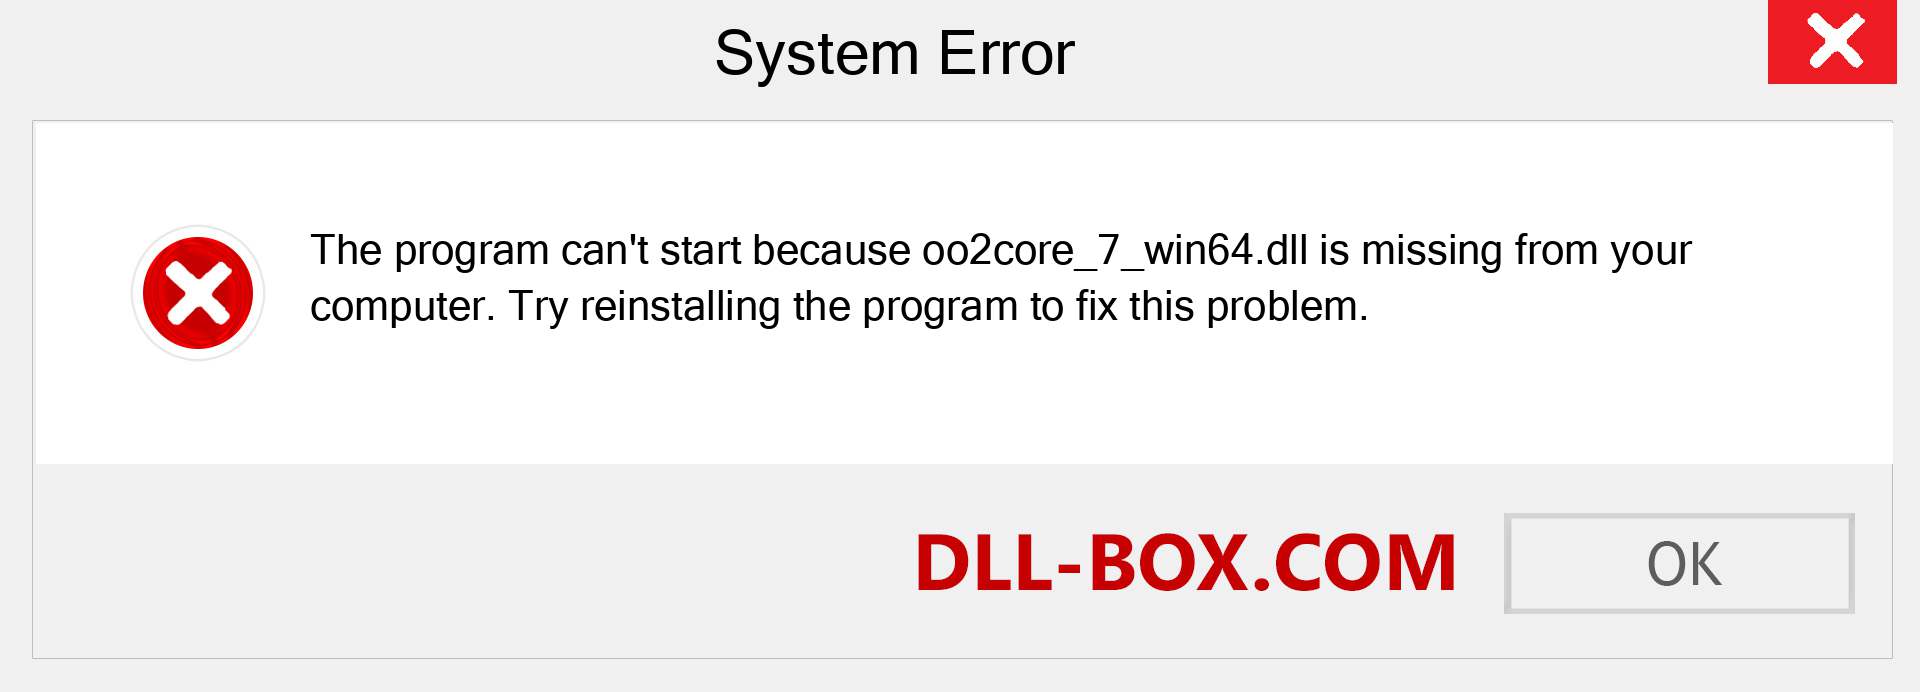  oo2core_7_win64.dll file is missing?. Download for Windows 7, 8, 10 - Fix  oo2core_7_win64 dll Missing Error on Windows, photos, images